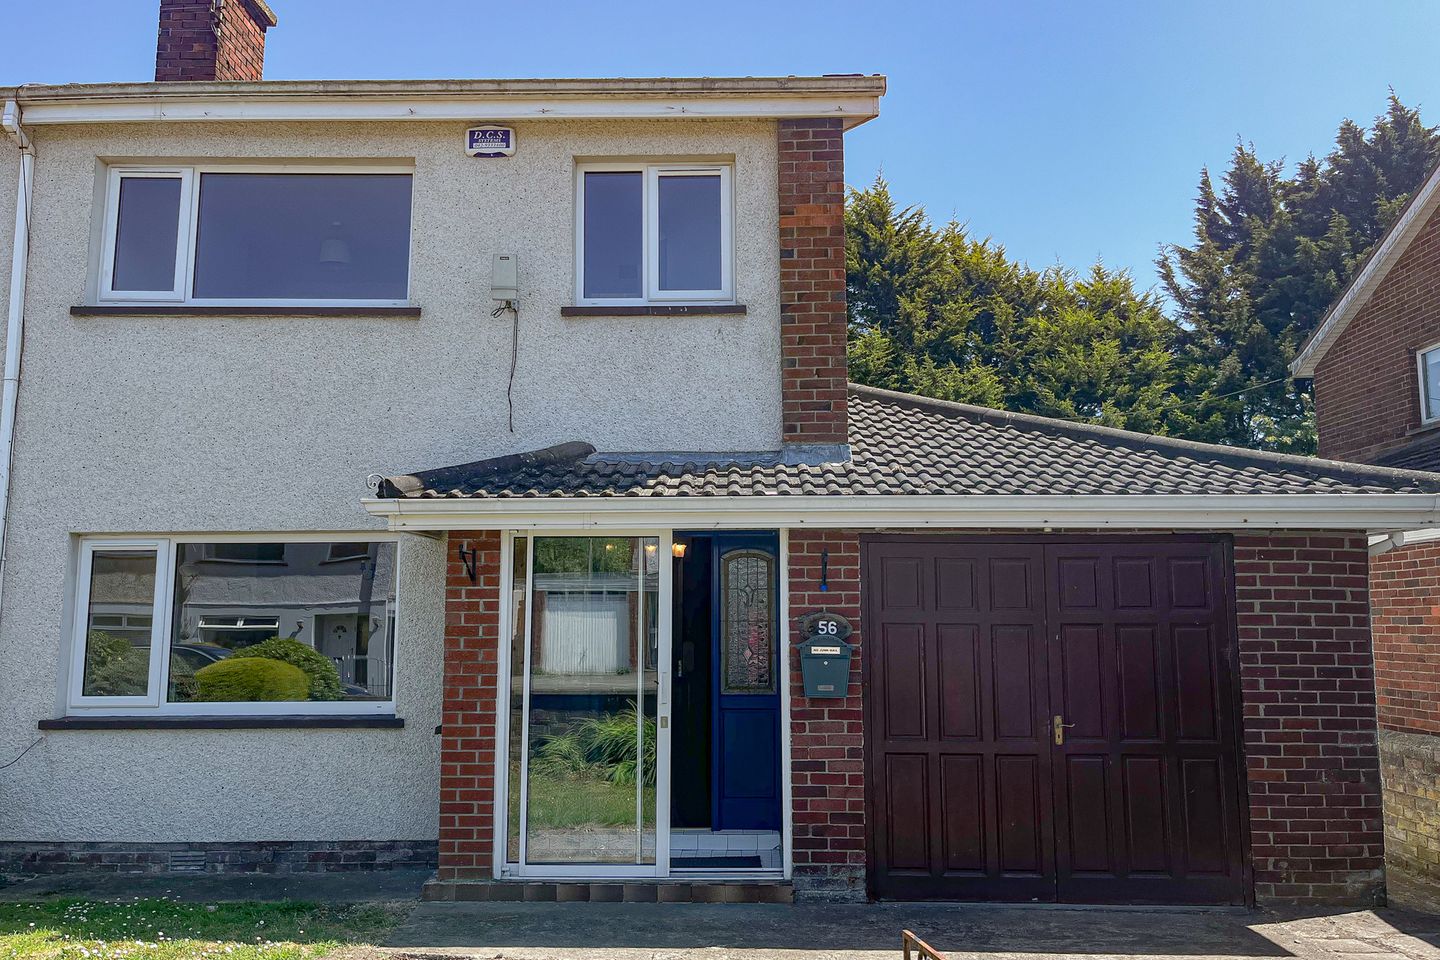 56 Cherryvale, Bay Estate, Dundalk, Co. Louth, A91X8E2